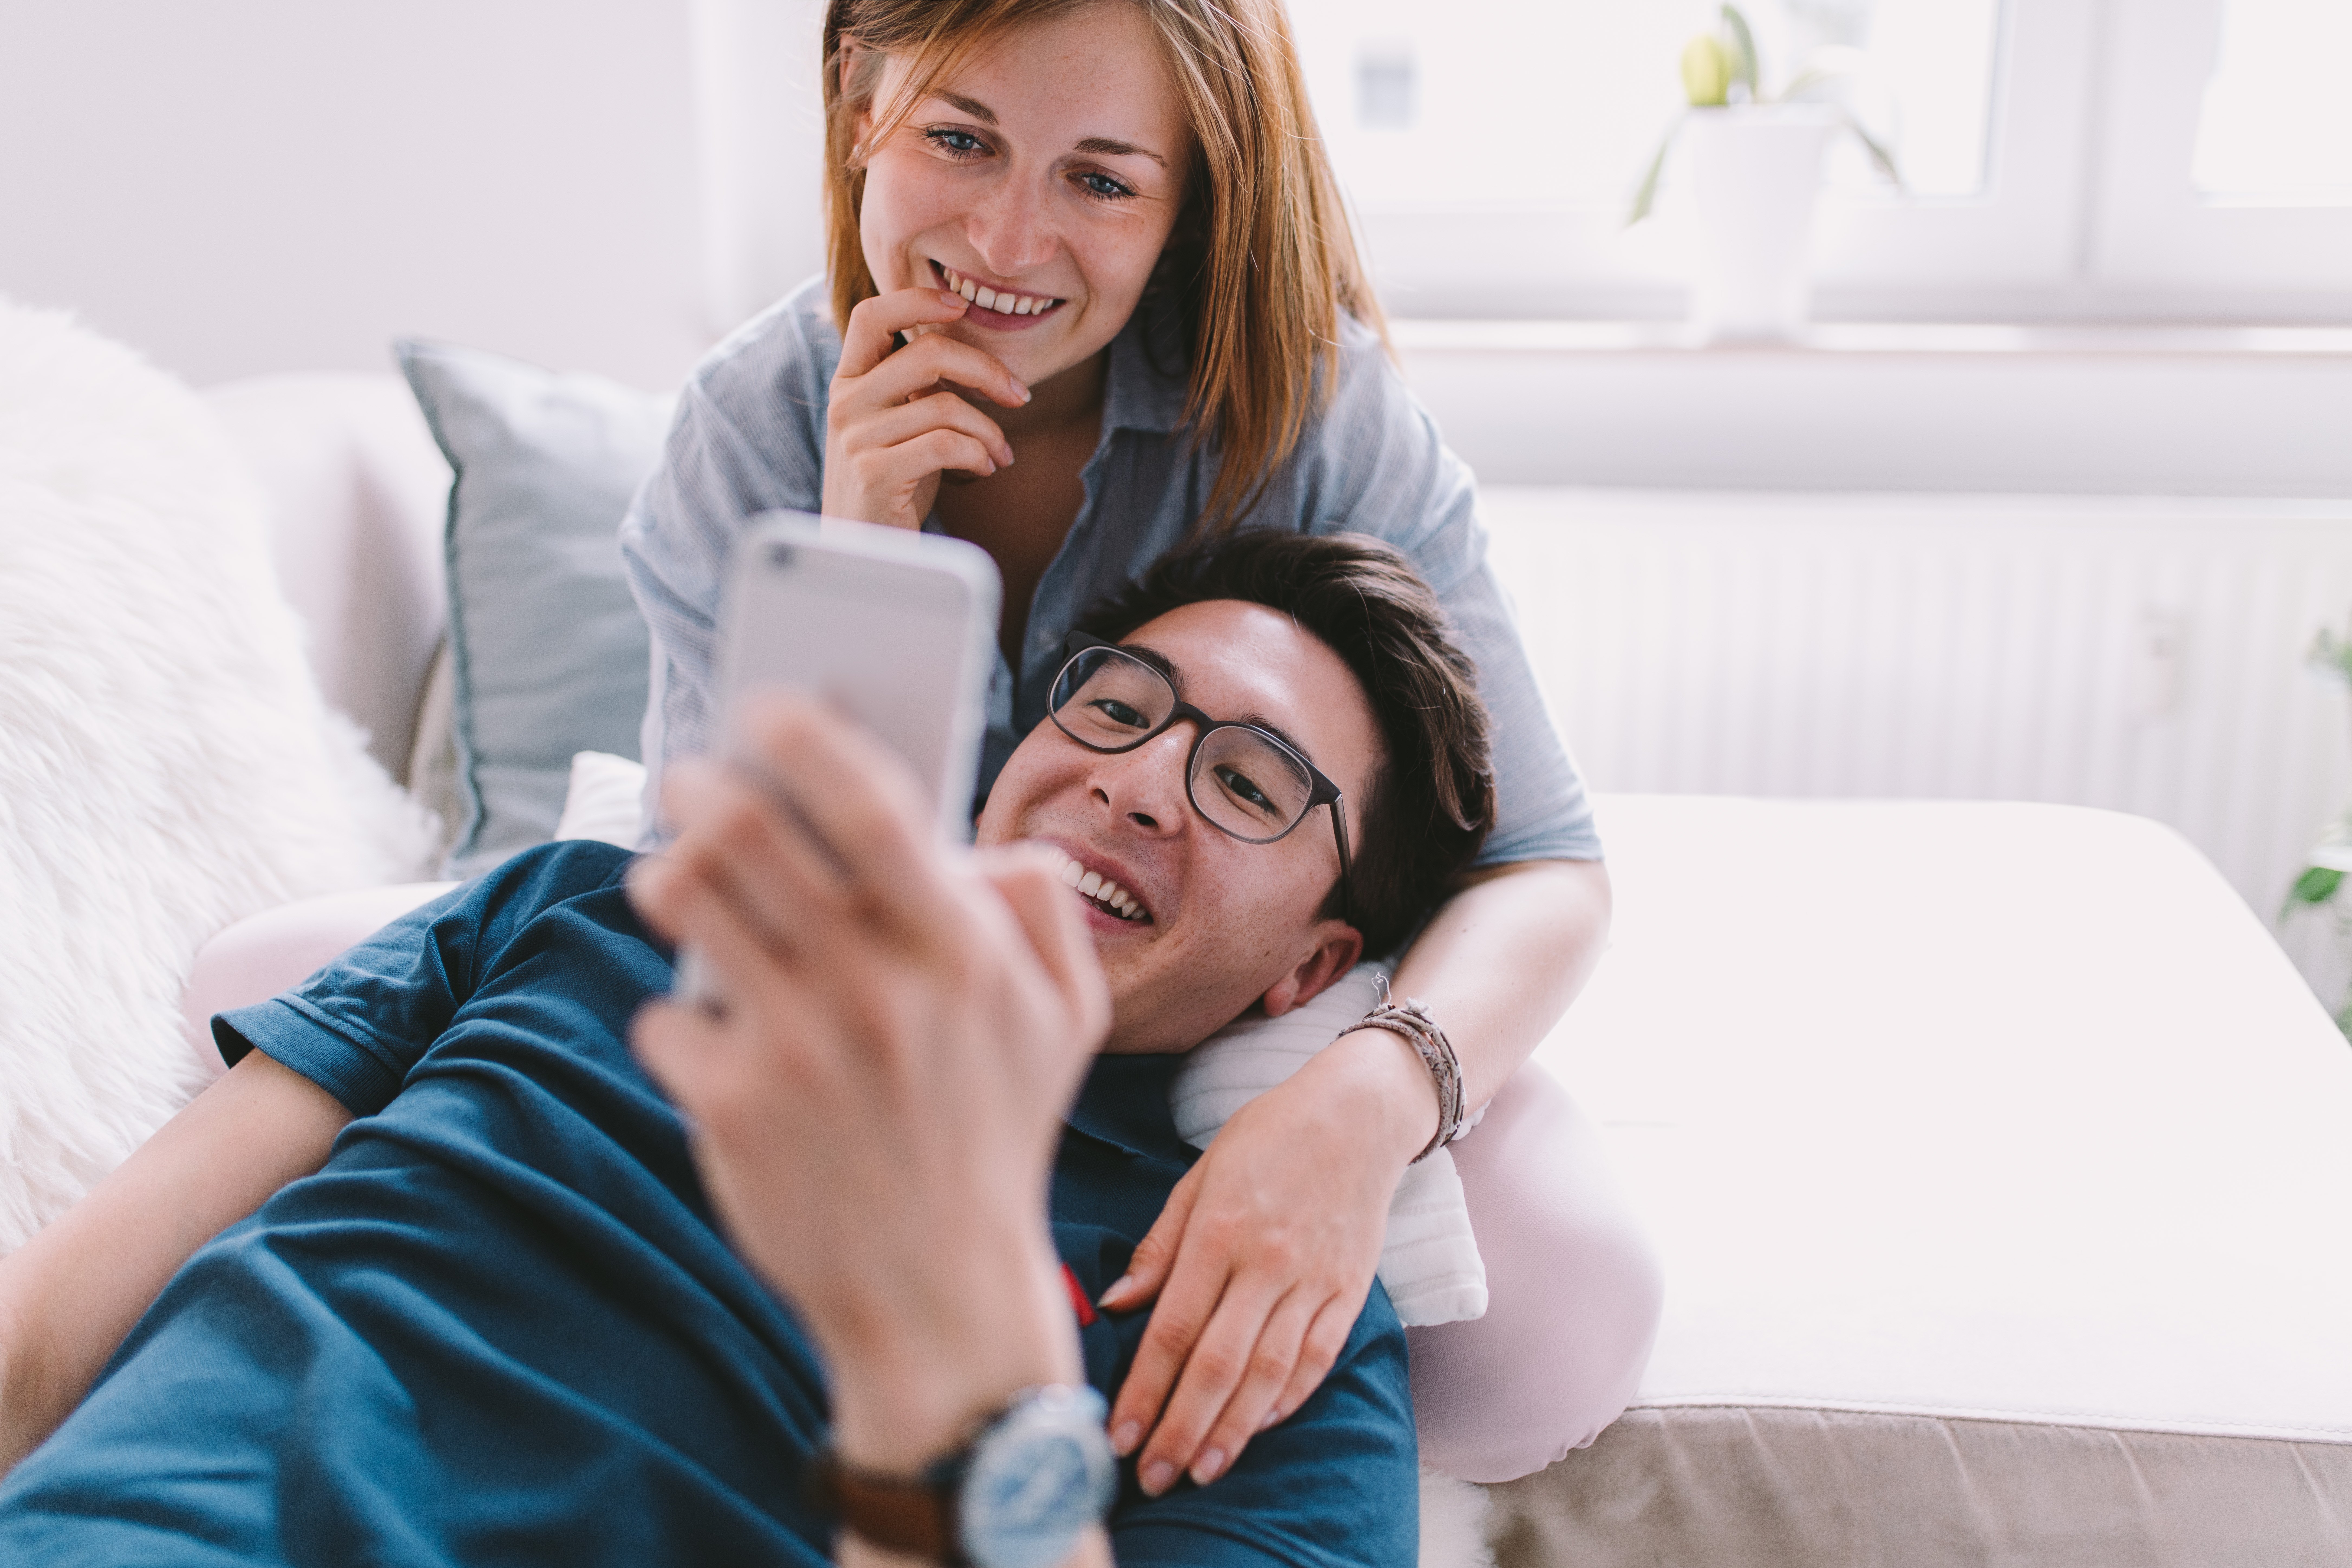 couple-sofa-home-chill-couch-relationship-internet-smartphone-social-media-browsing_t20_e8xZYv